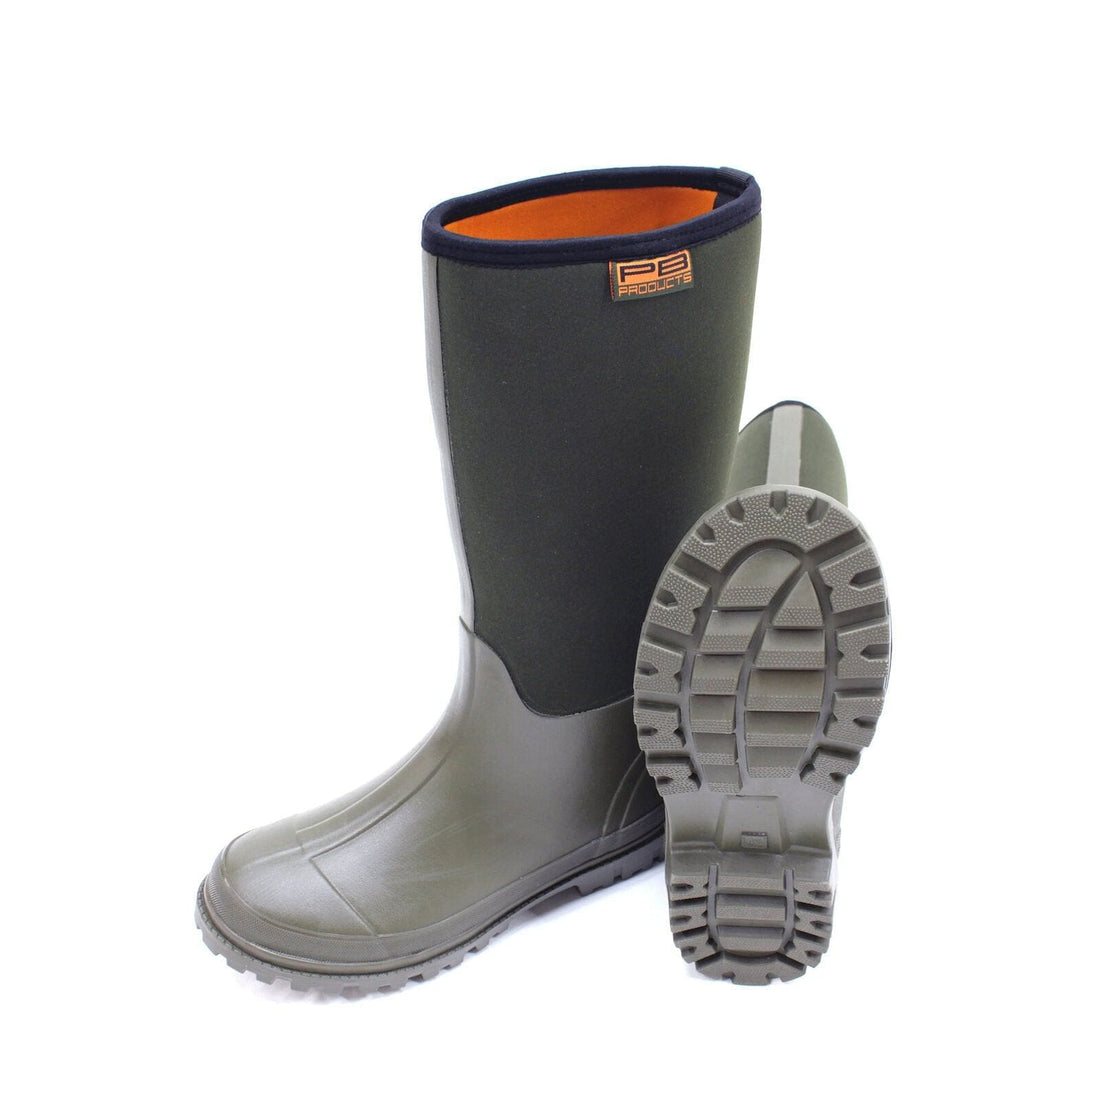 PB Products Neoprene Boots 6mm 47